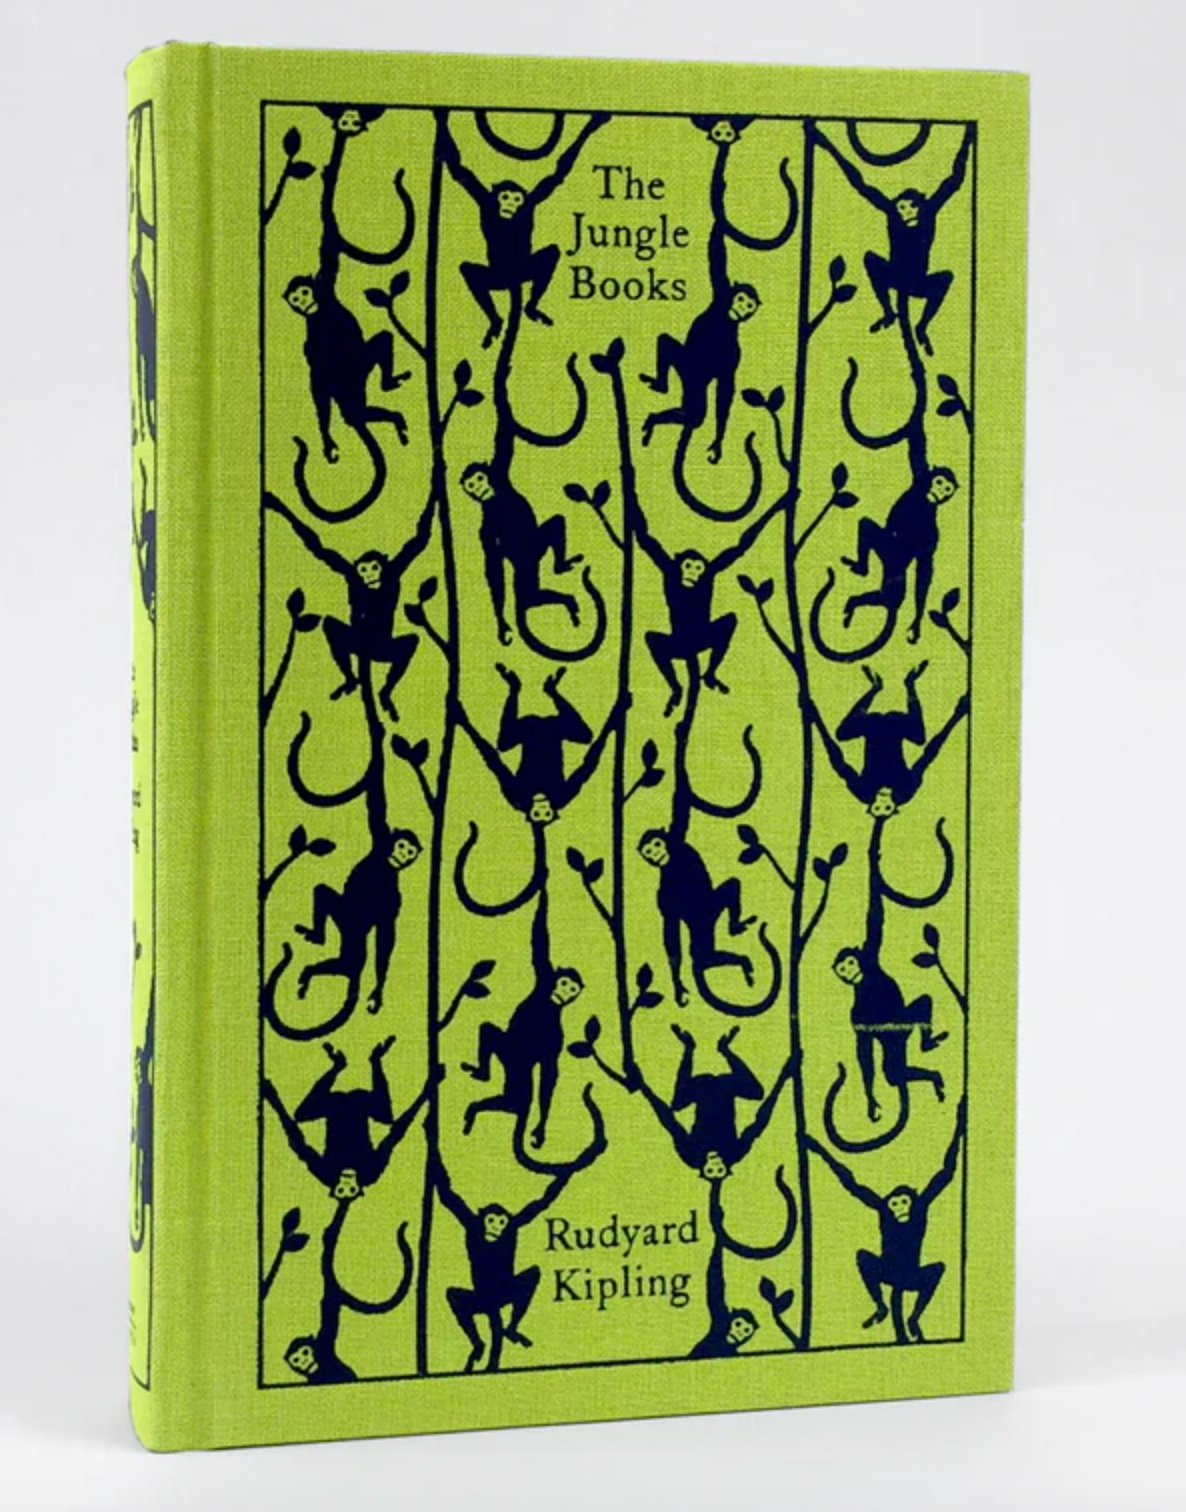 A bright green book against a white background. The book cover has a pattern of monkeys drawn across it. Black text at the top says "The Jungle Books: Rudyard Kipling"